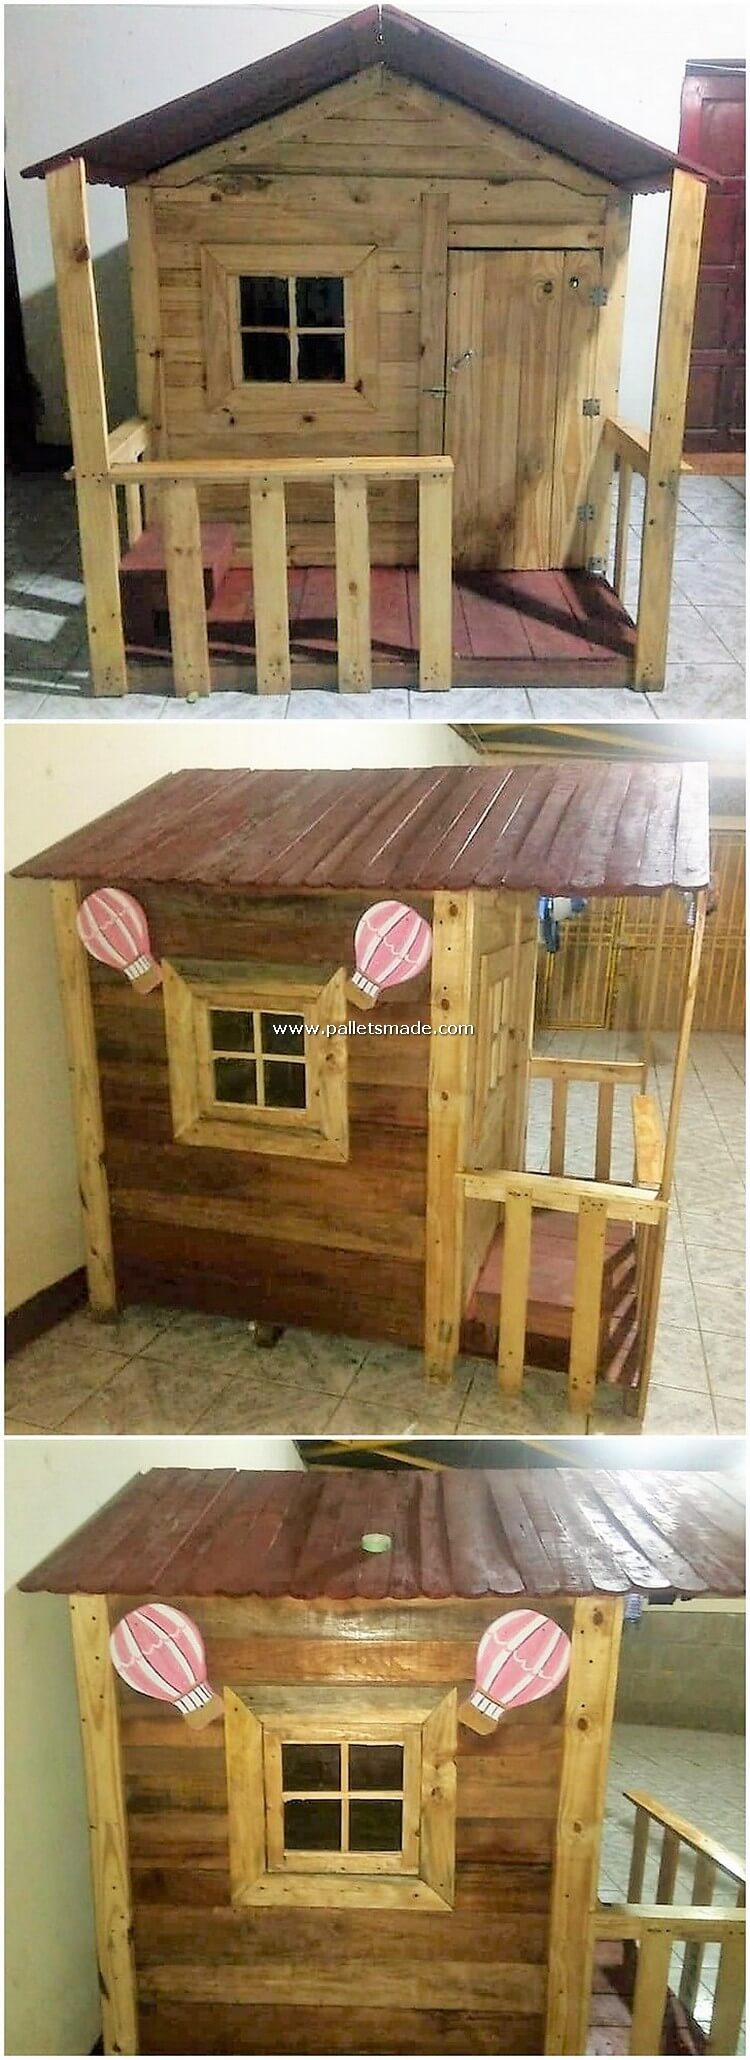 Pallet House